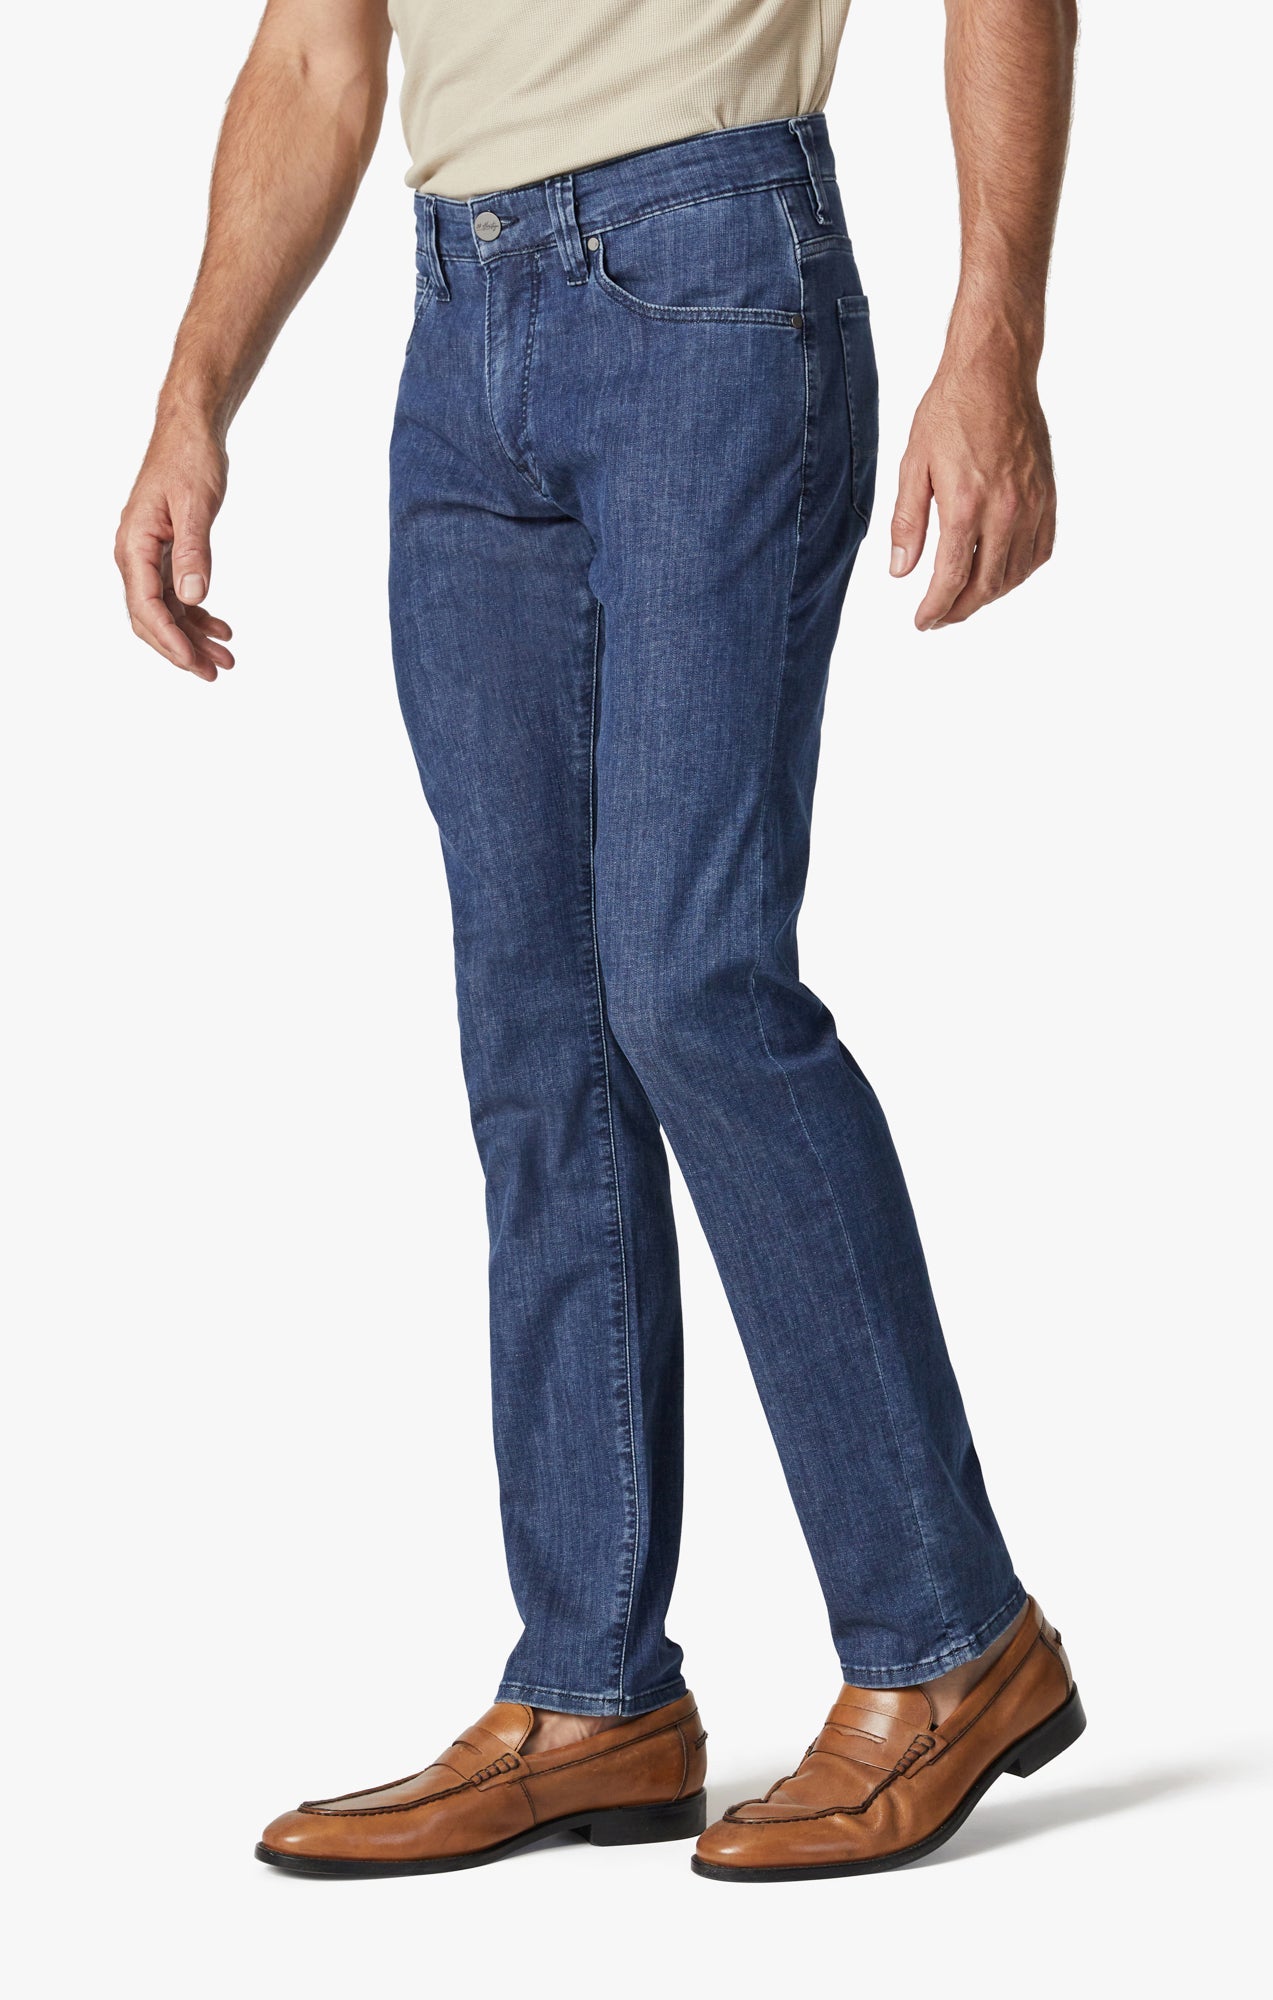 Charisma Relaxed Straight Leg Jeans In Mid Kona Image 3